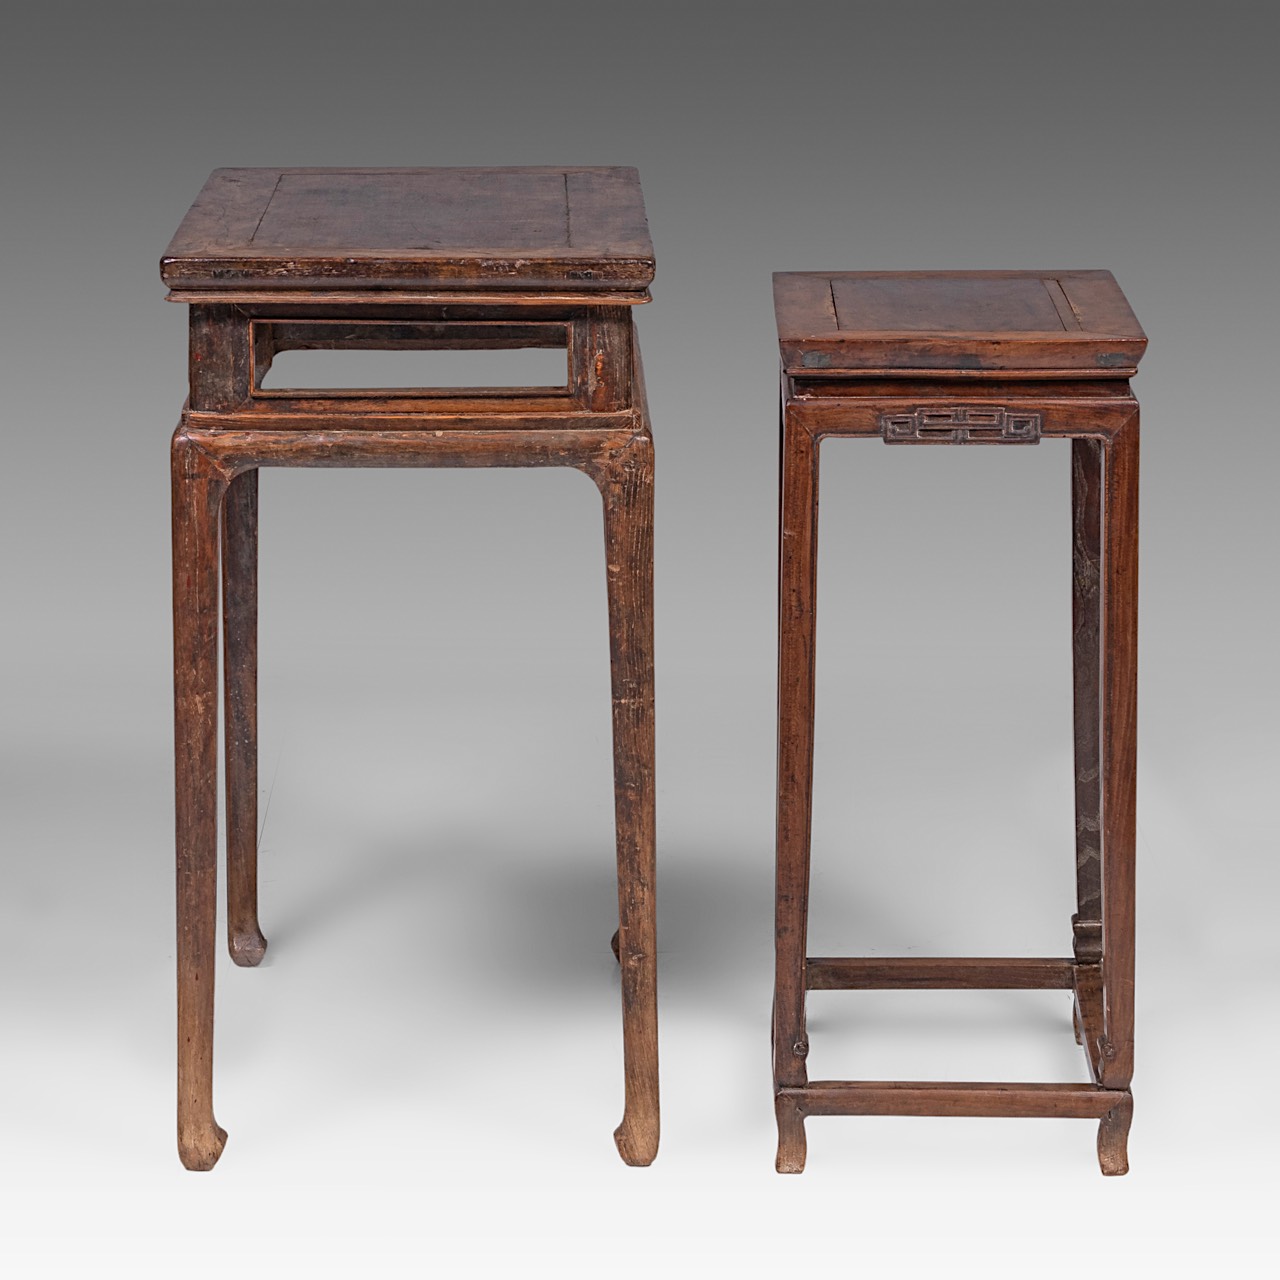 Two Chinese hardwood side tables, mid - late Qing dynasty, largest H 82 - 69 x 42 cm - Image 5 of 7